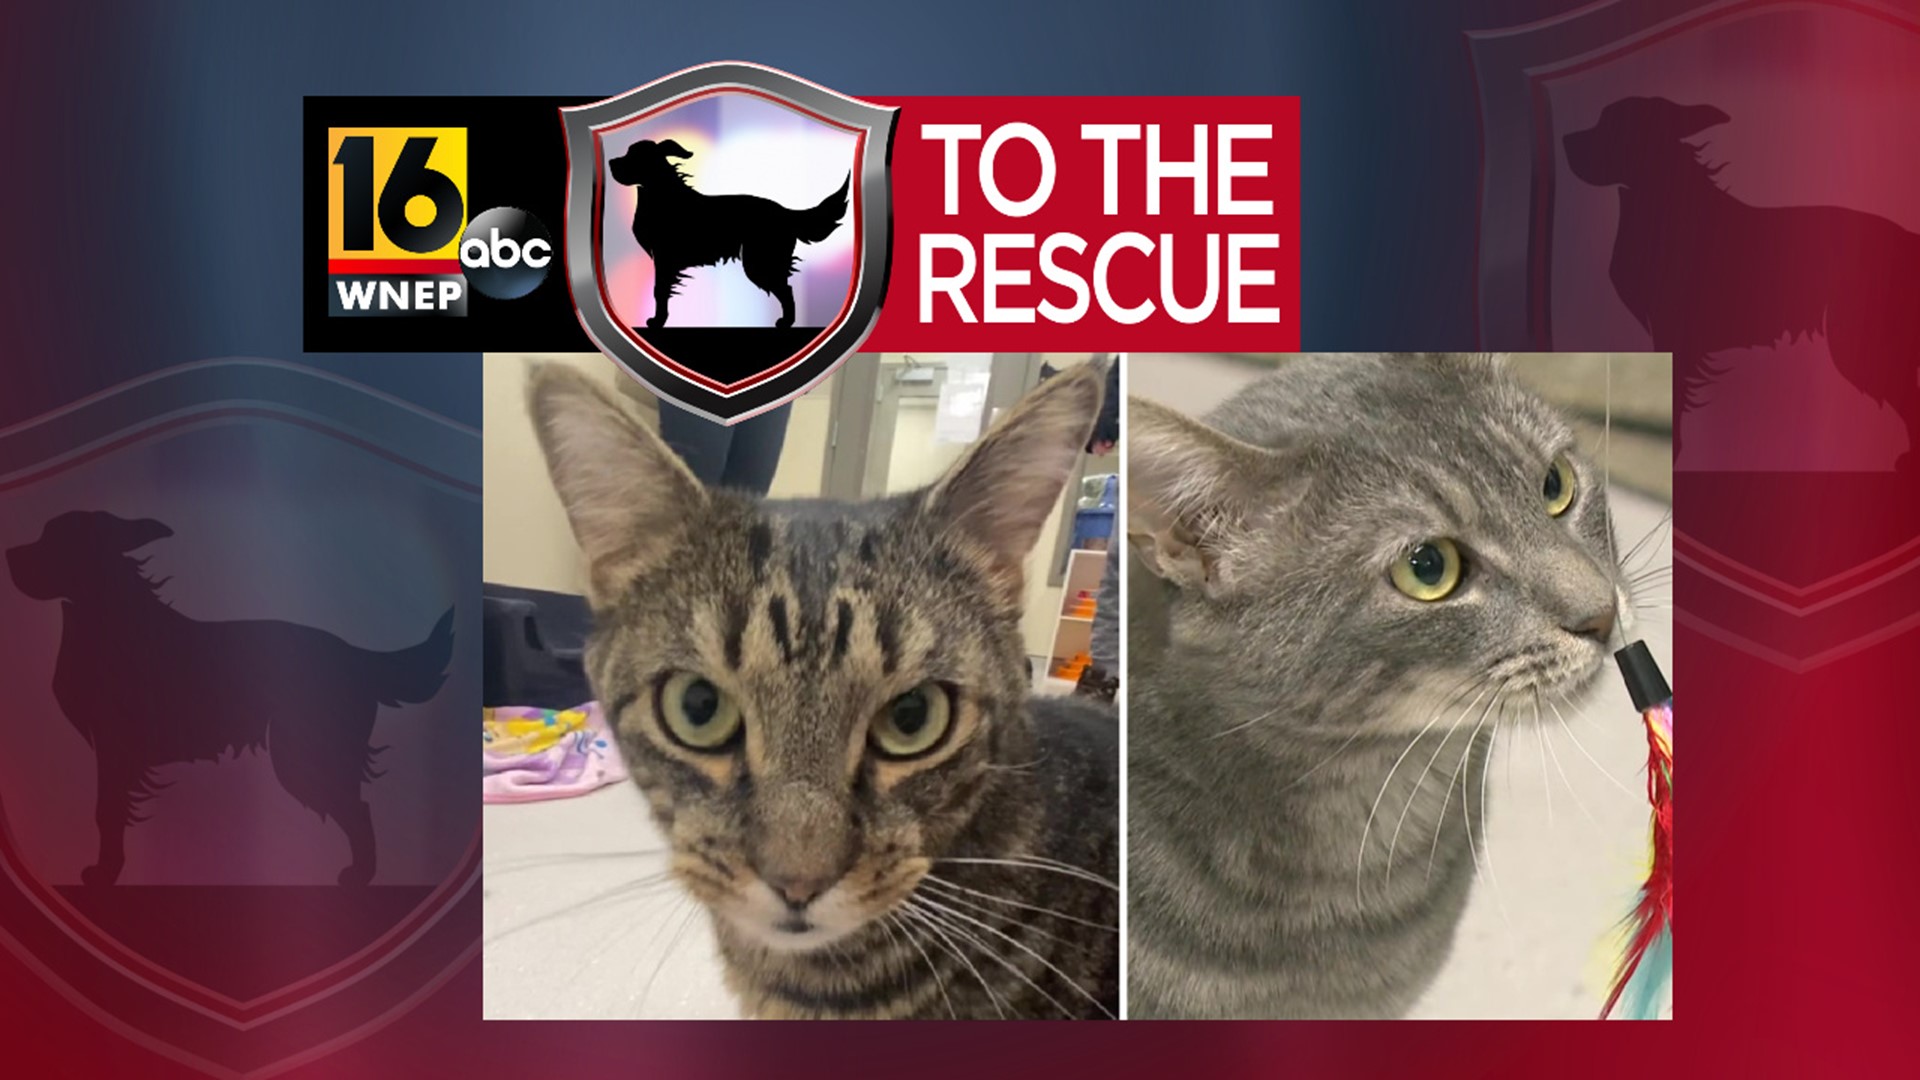 This week, we meet several cats up for adoption at a shelter in Lackawanna County.